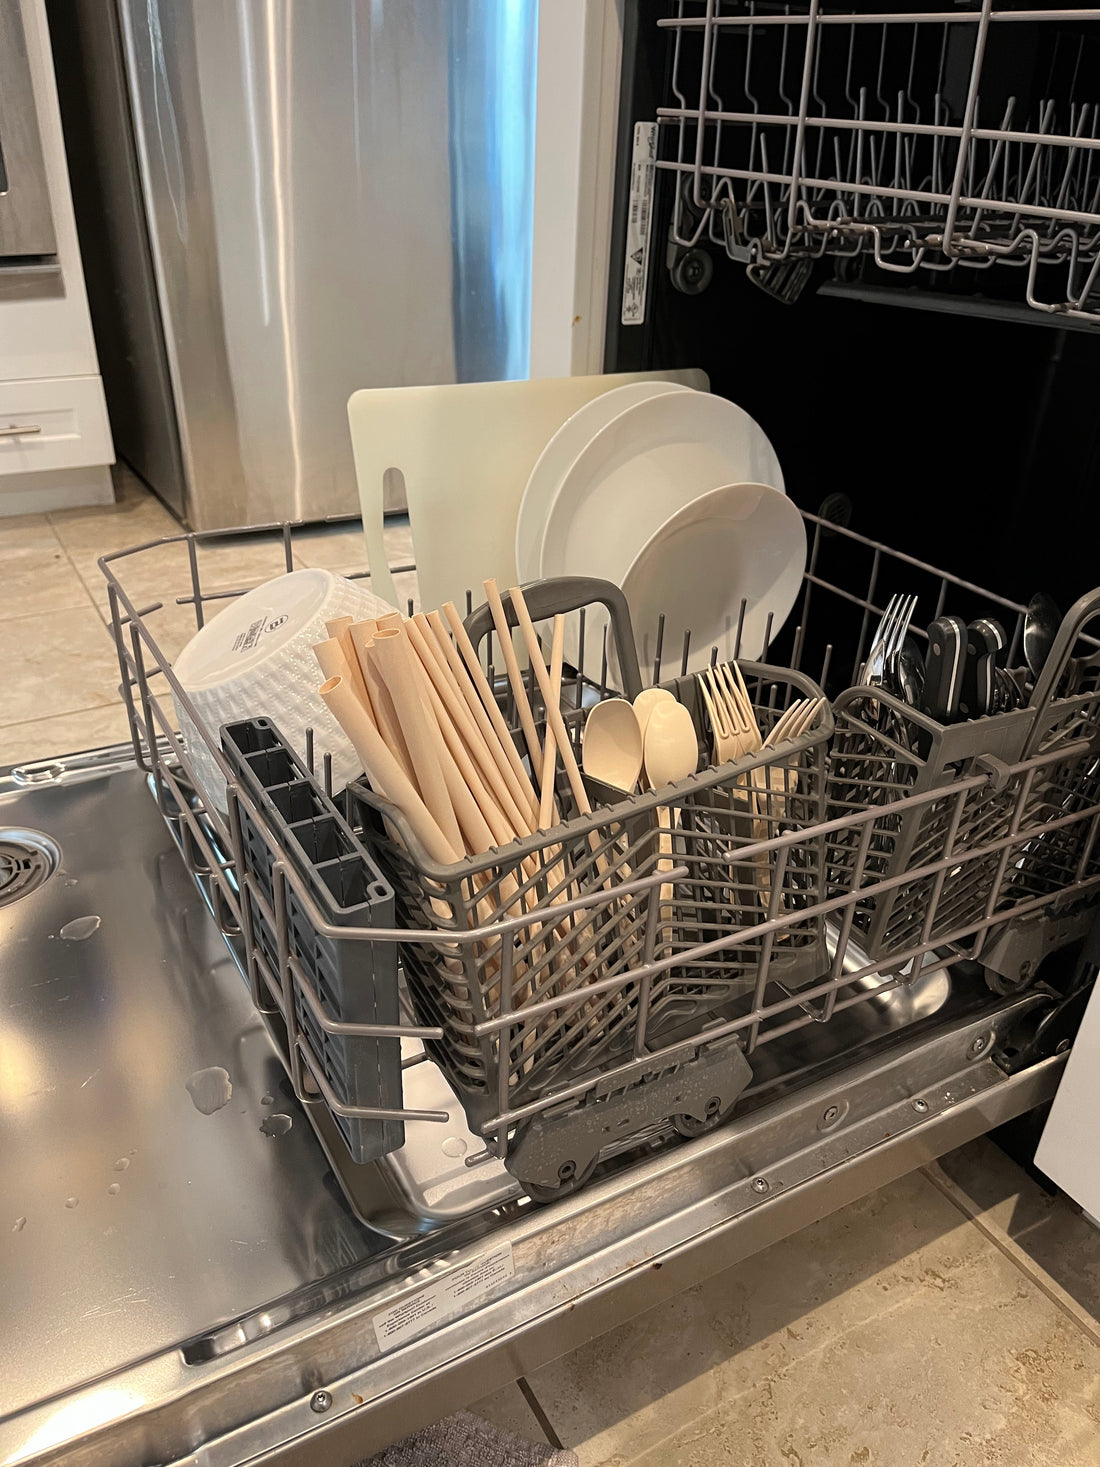 Towel in the Dishwasher: Viral Hack Put to the Test by Lifehacker